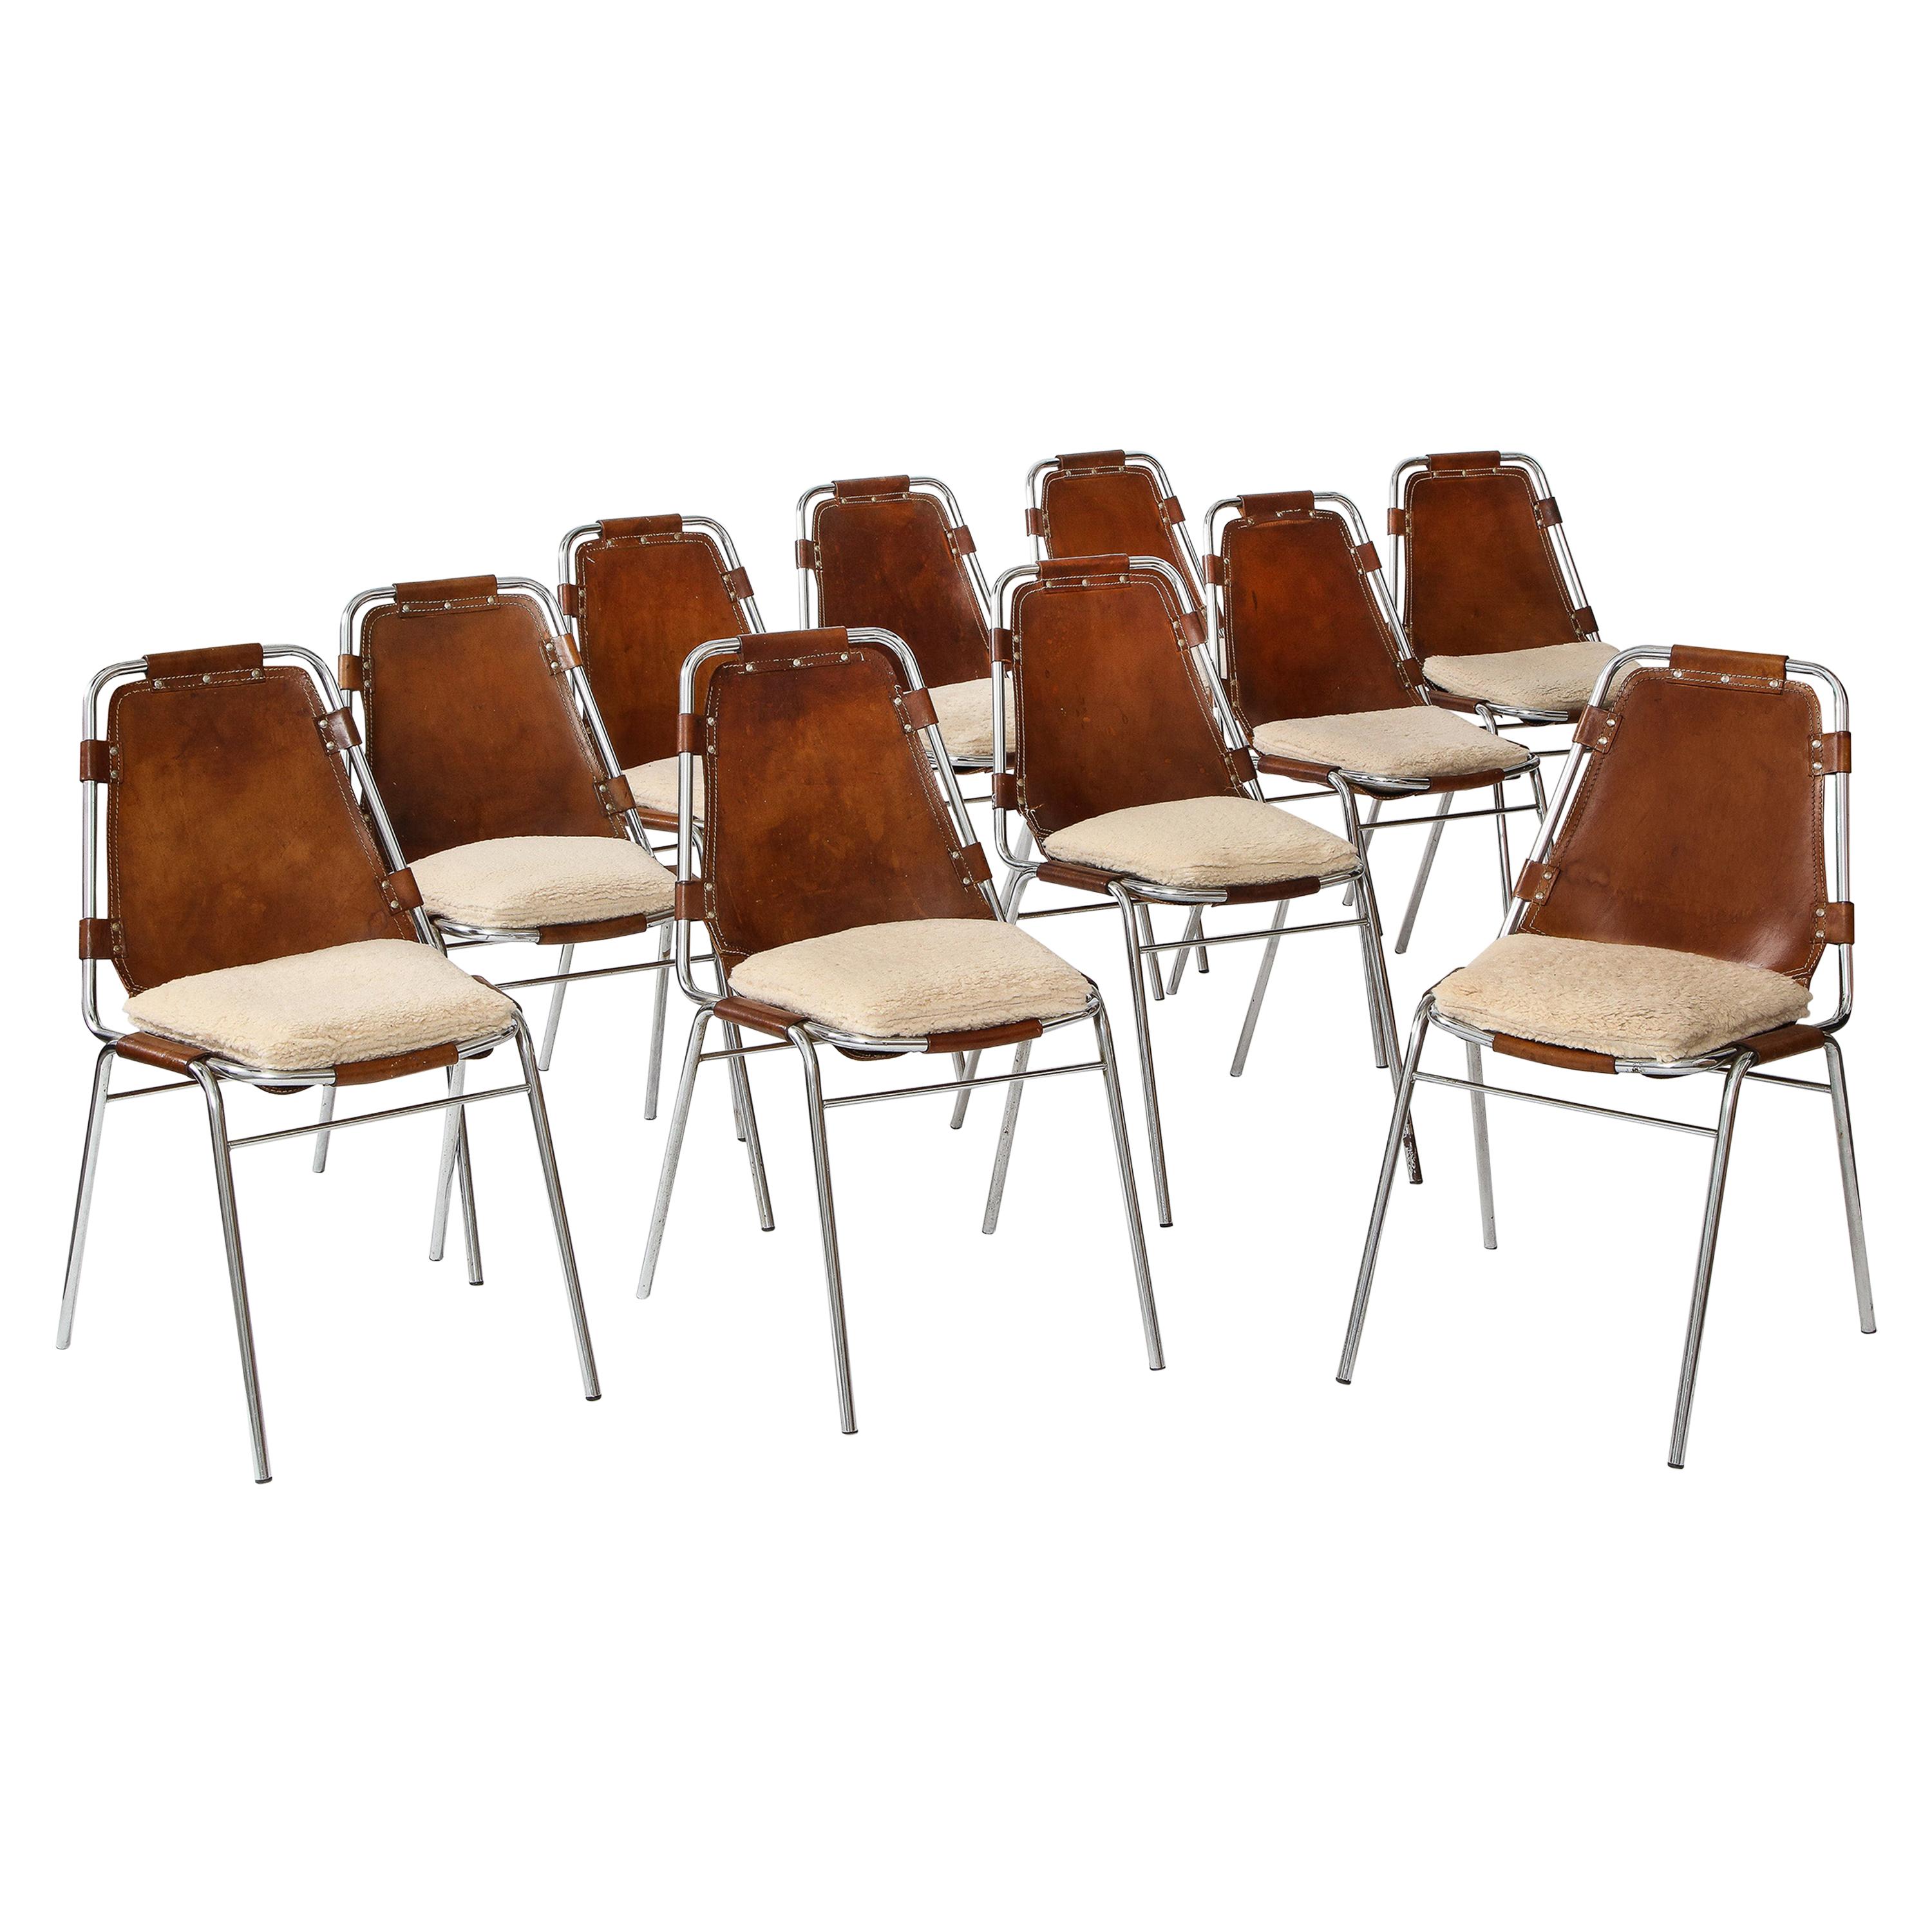 Charlotte Perriand Les Arcs Set of 10 Dining Chairs with Sheepskin Cushions